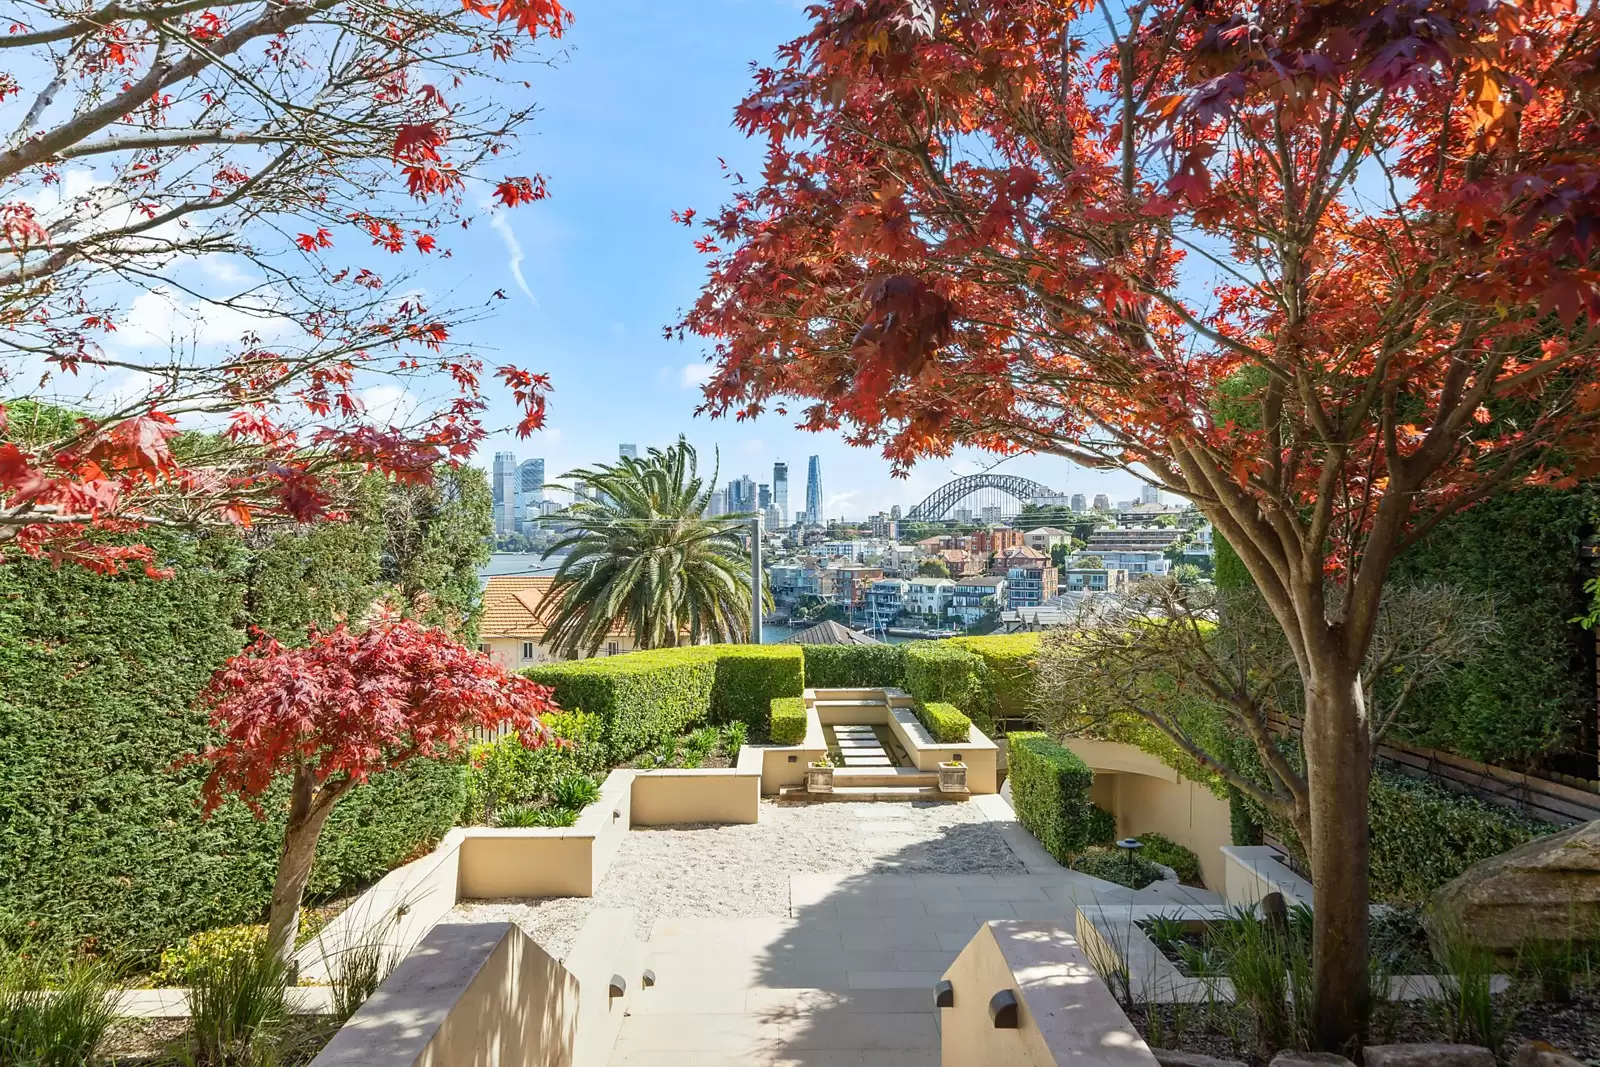 Photo #7: 29 Milson Road, Cremorne Point - Sold by Sydney Sotheby's International Realty